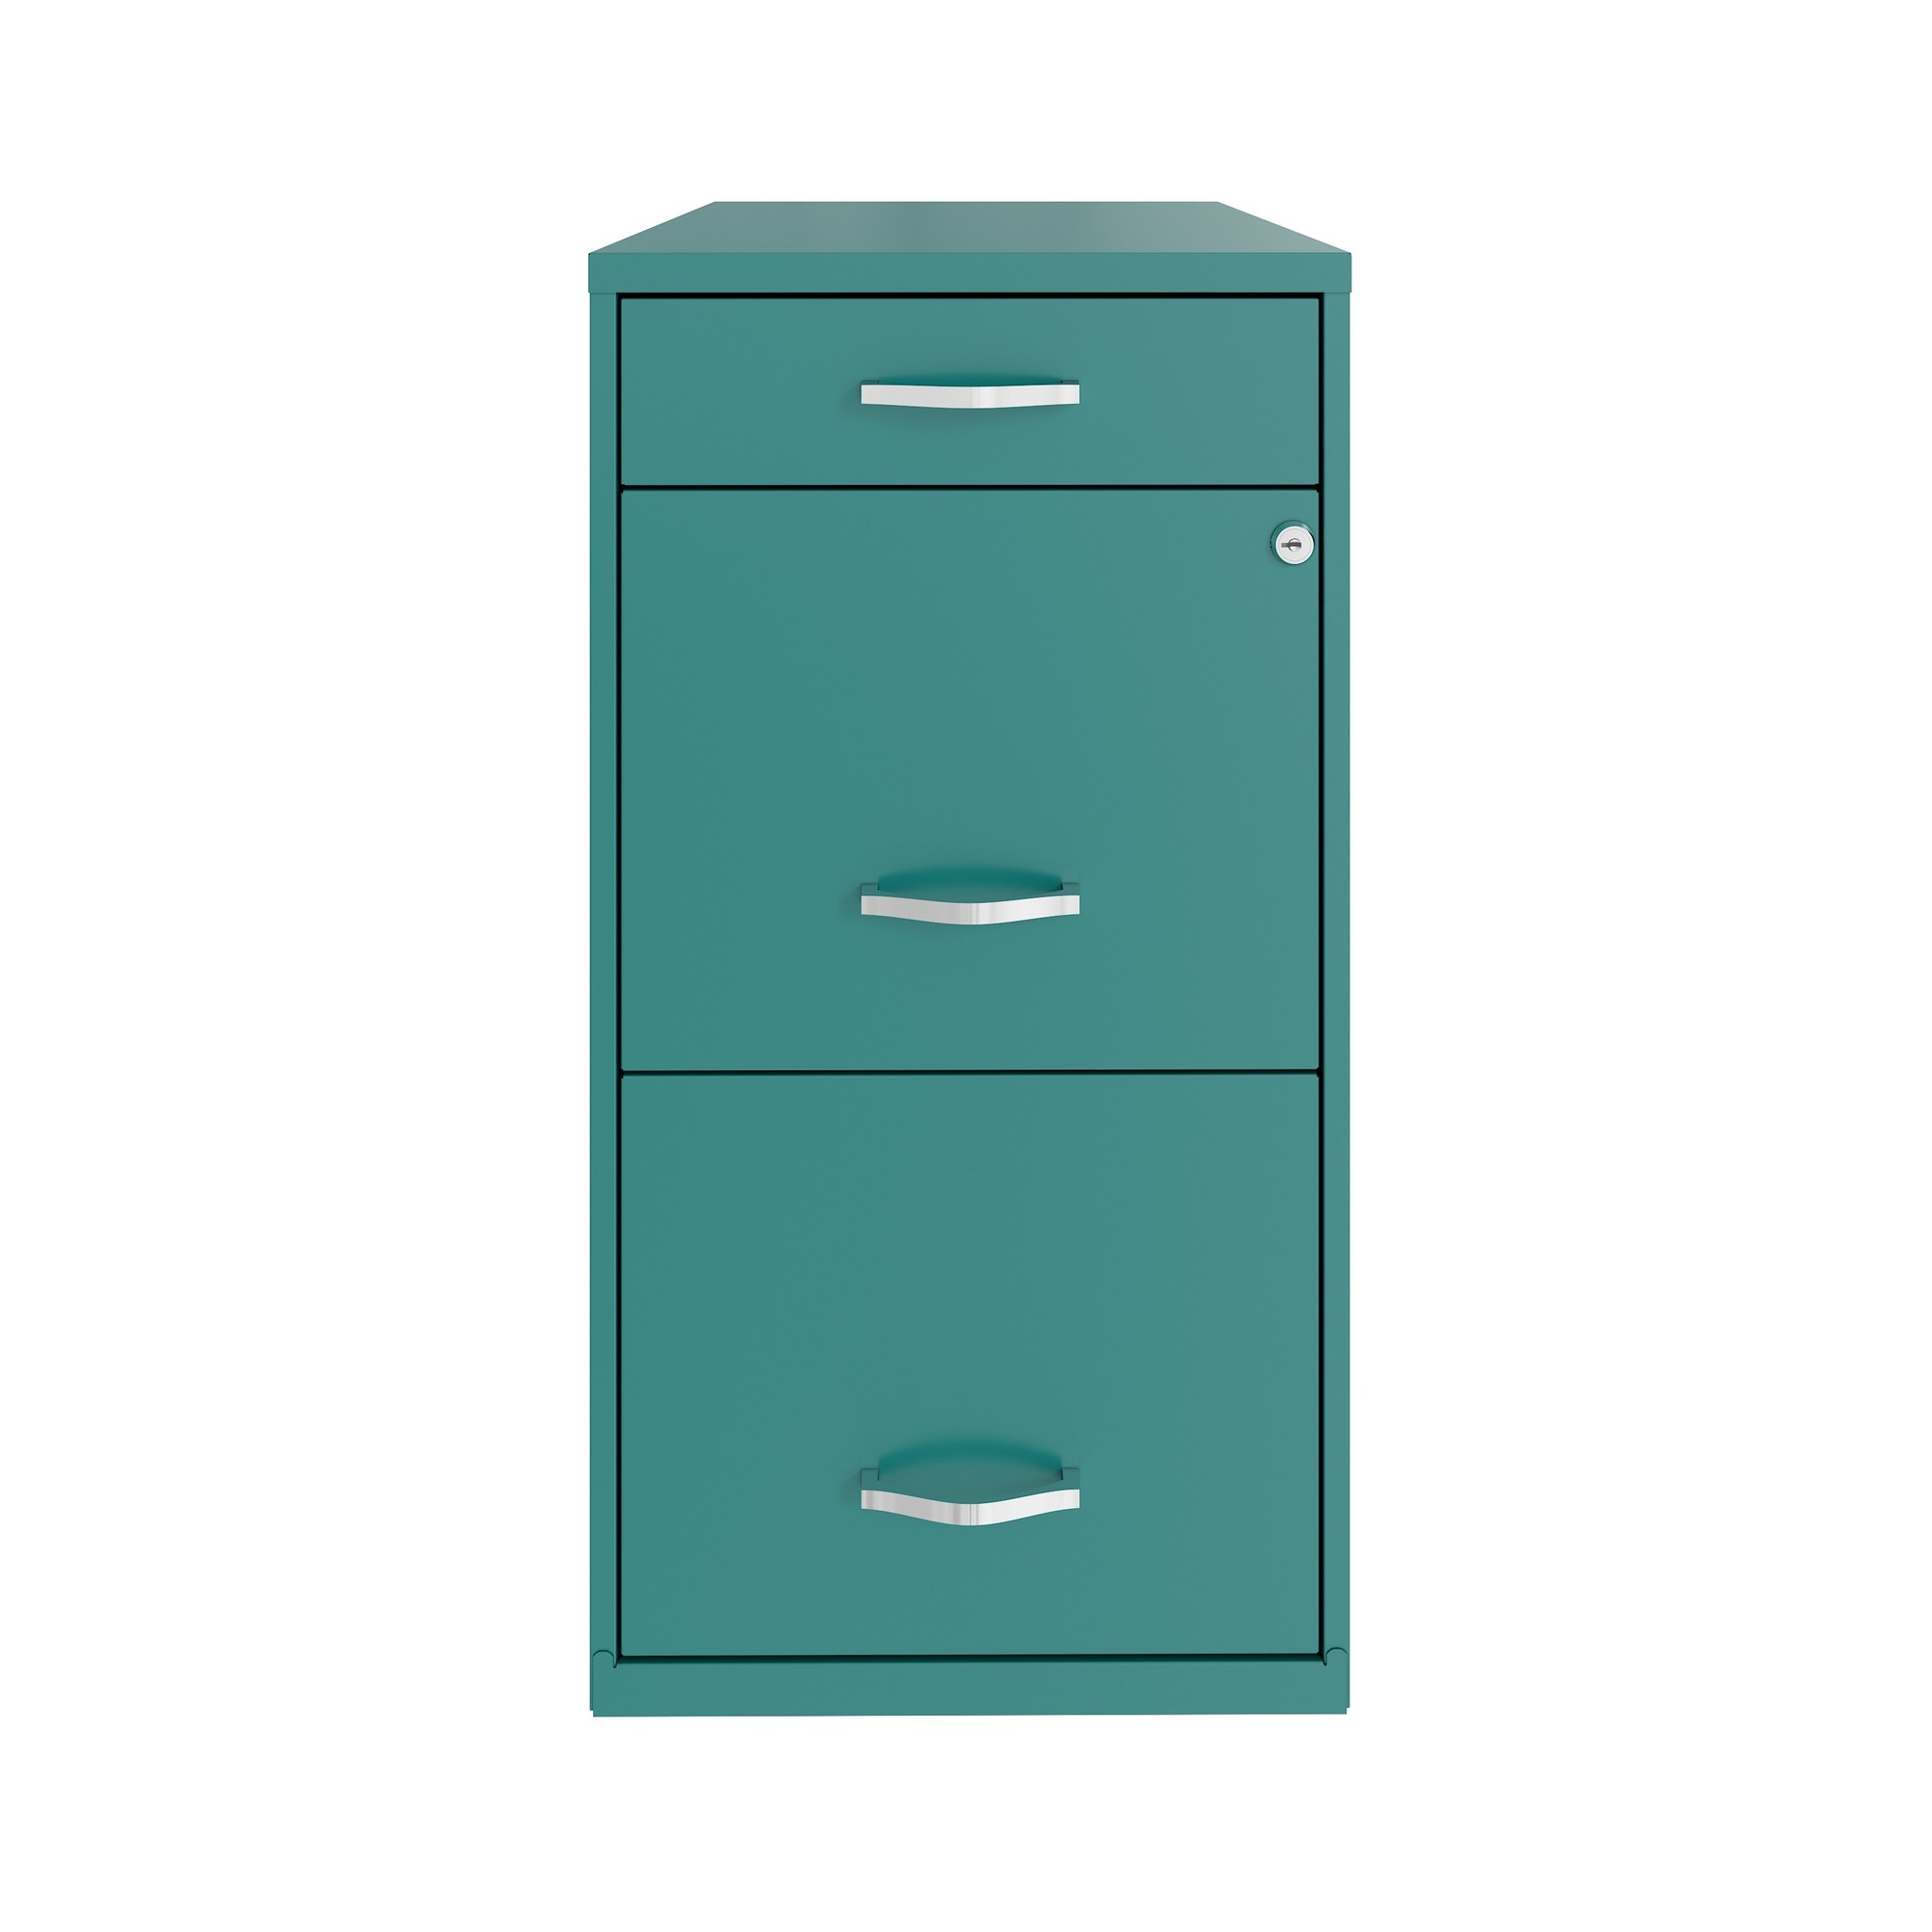 Hirsh Industries, 3 Drawer Letter Width File Cabinet, Pencil Drawer, Width 14.25 in, Depth 18 in, Height 27.32 in, Model 24415